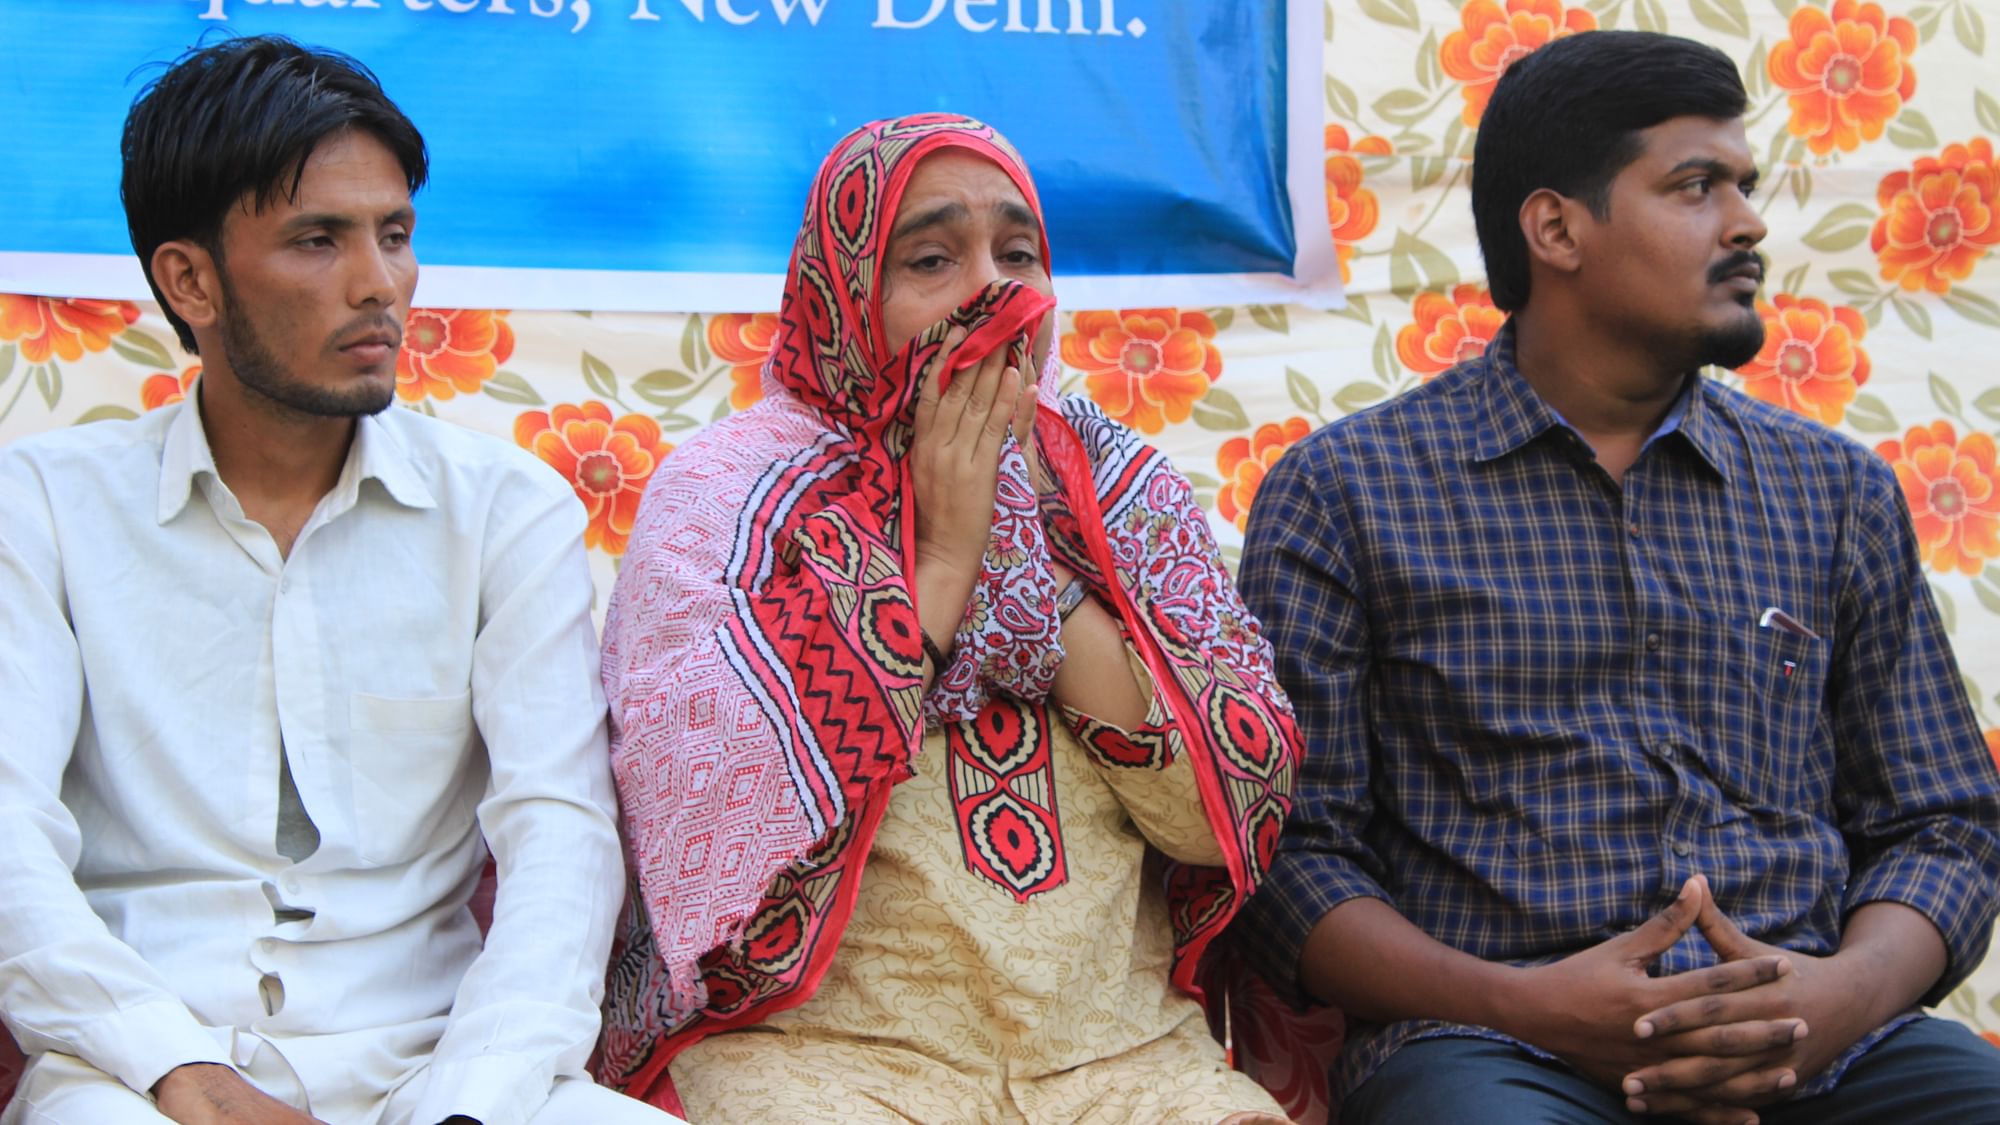 Azmat Khan (left), who was accompanying Pehlu Khan when he was lynched in Alwar, and Najeeb Ahmed’s mother Fatima Nafees (centre) unite for an iftar in New Delhi (Photo: Shiv Kumar Maurya/<b>The Quint</b>)